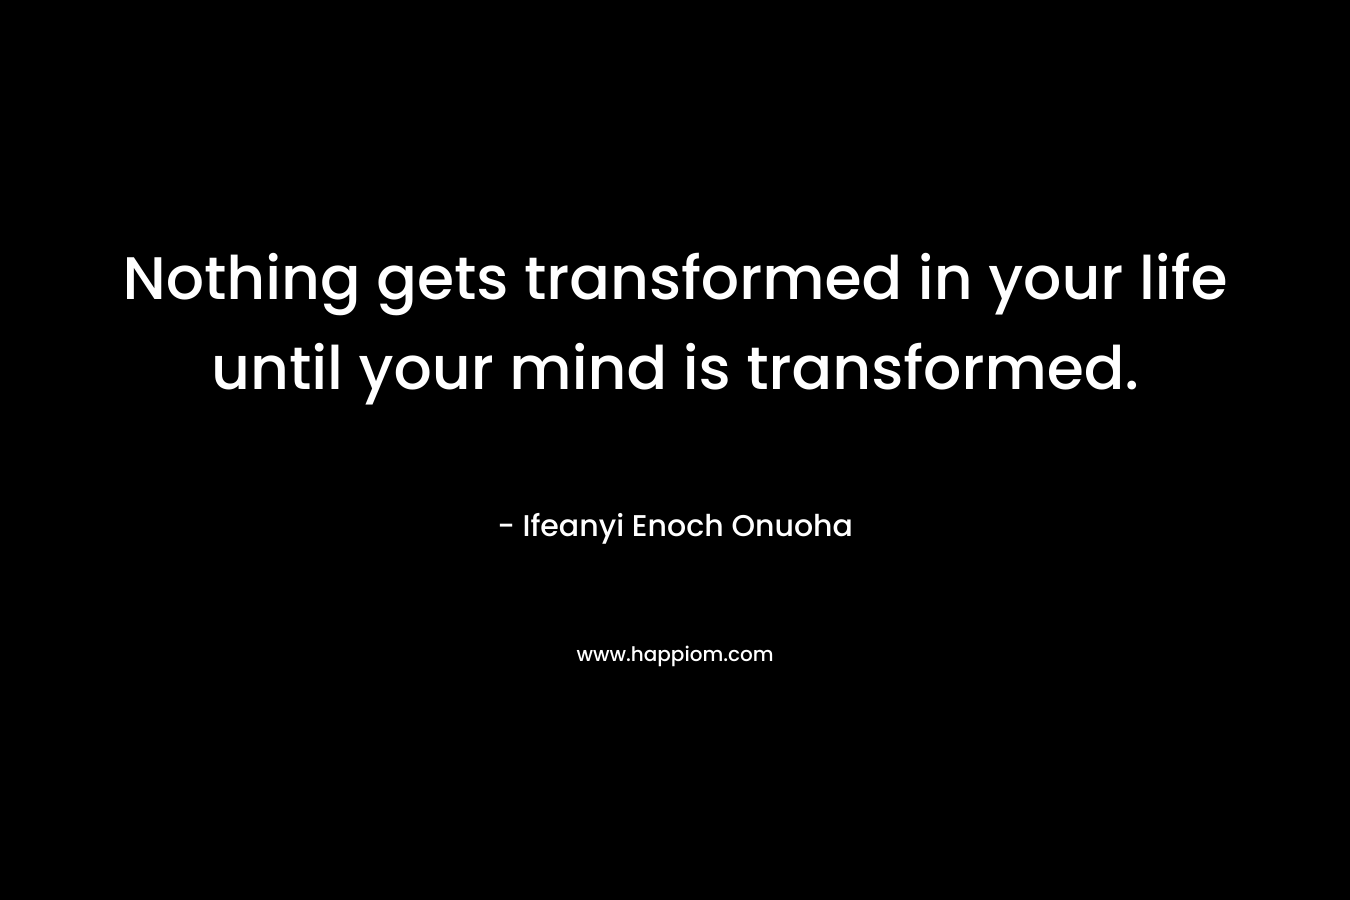 Nothing gets transformed in your life until your mind is transformed.